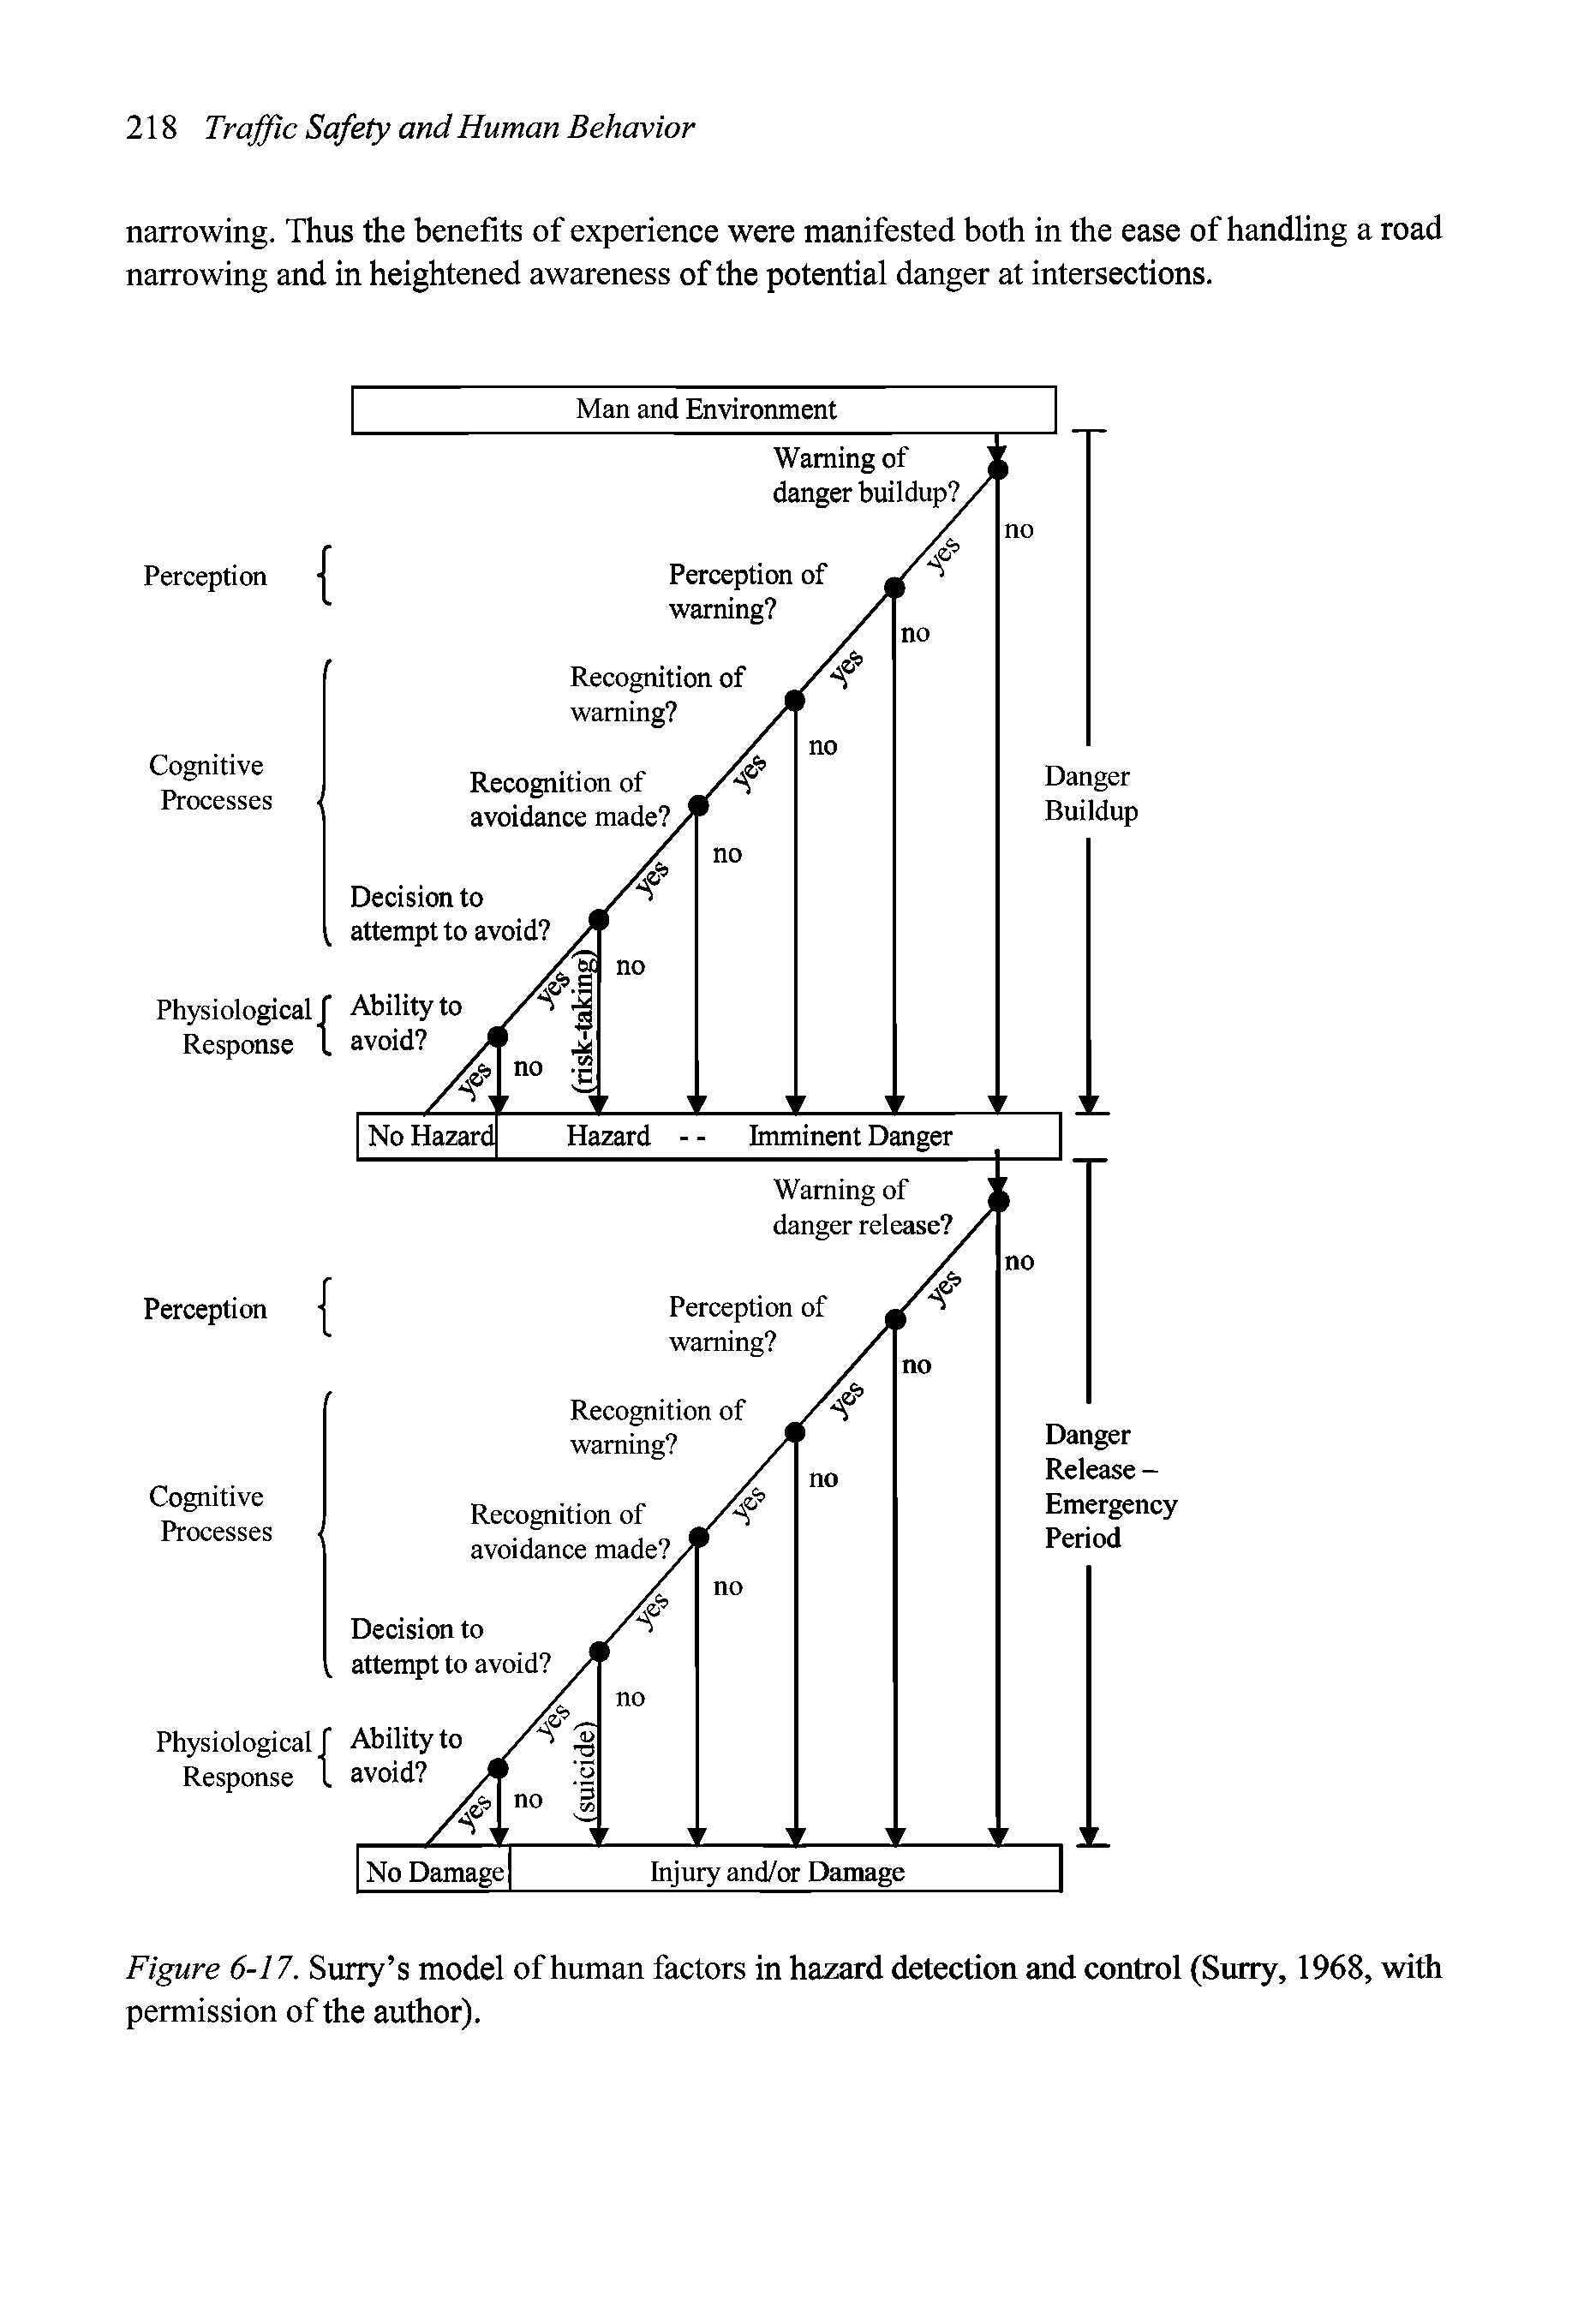 Figure 6-17. Surry s model of human factors in hazard detection and control (Surry, 1968, with permission of the author).